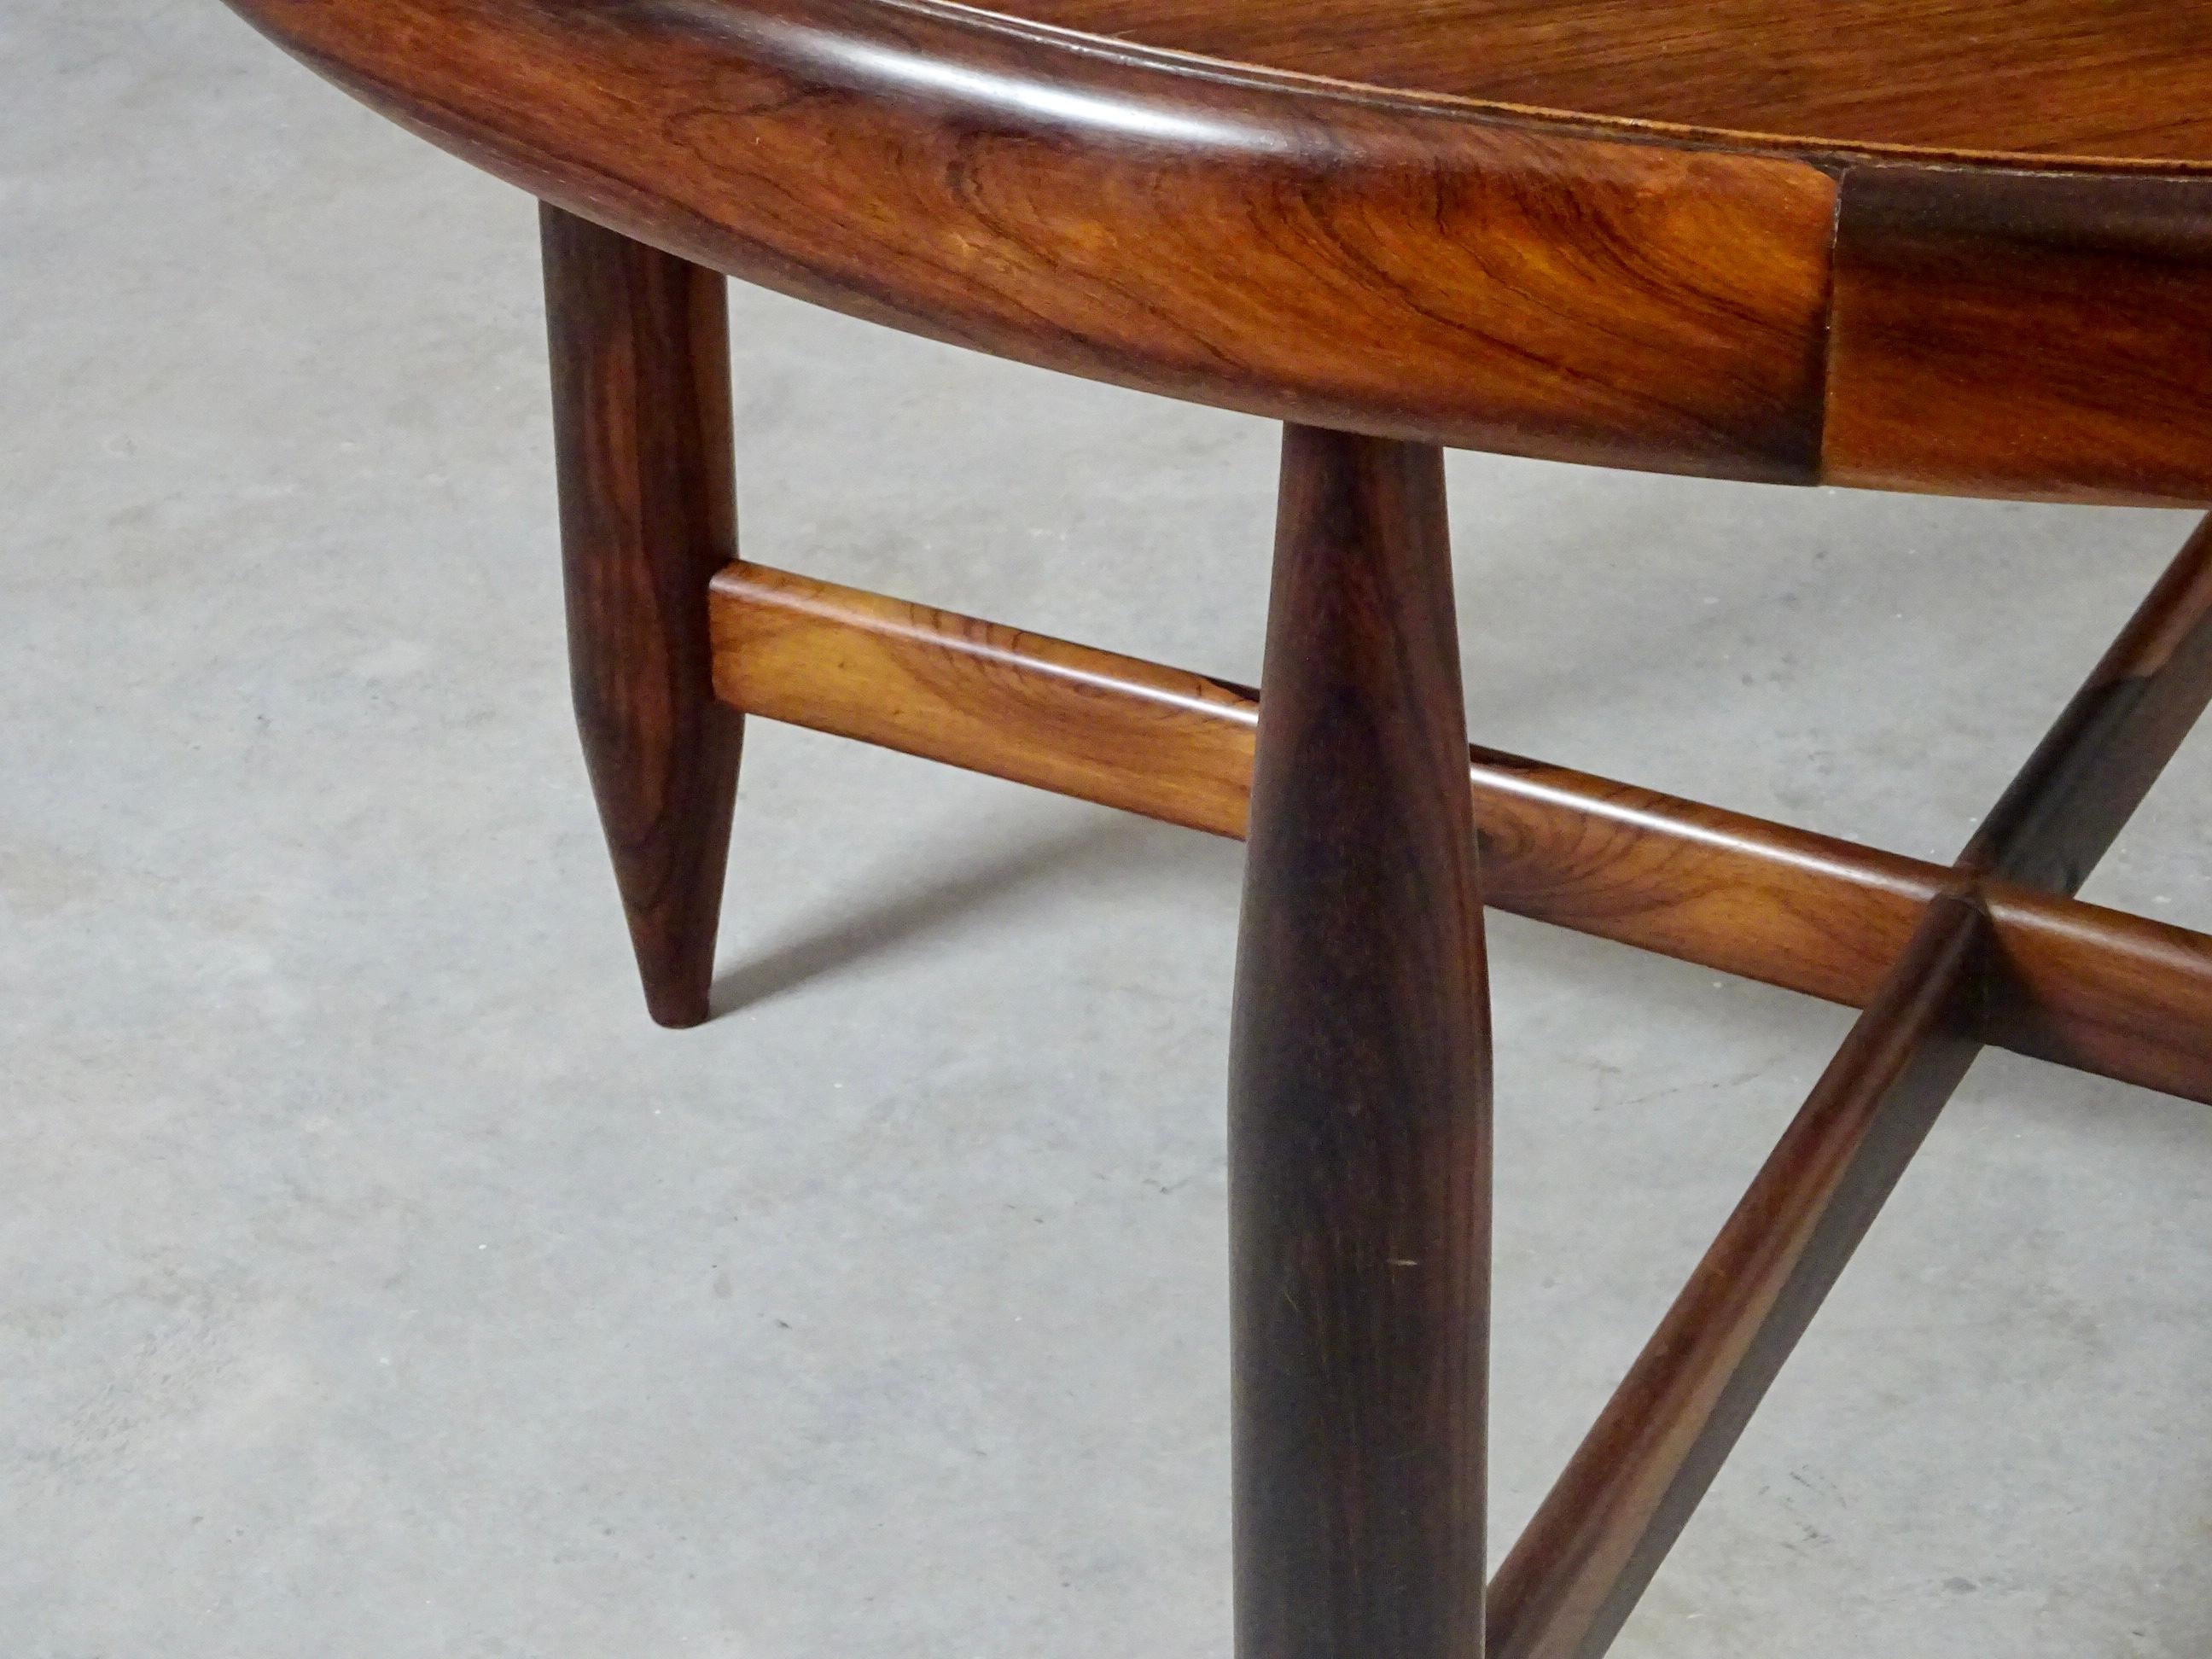 Mid-20th Century Mid-Century Modern Dining Table by Jorge Jabour Mauad, Brazil, 1960s For Sale